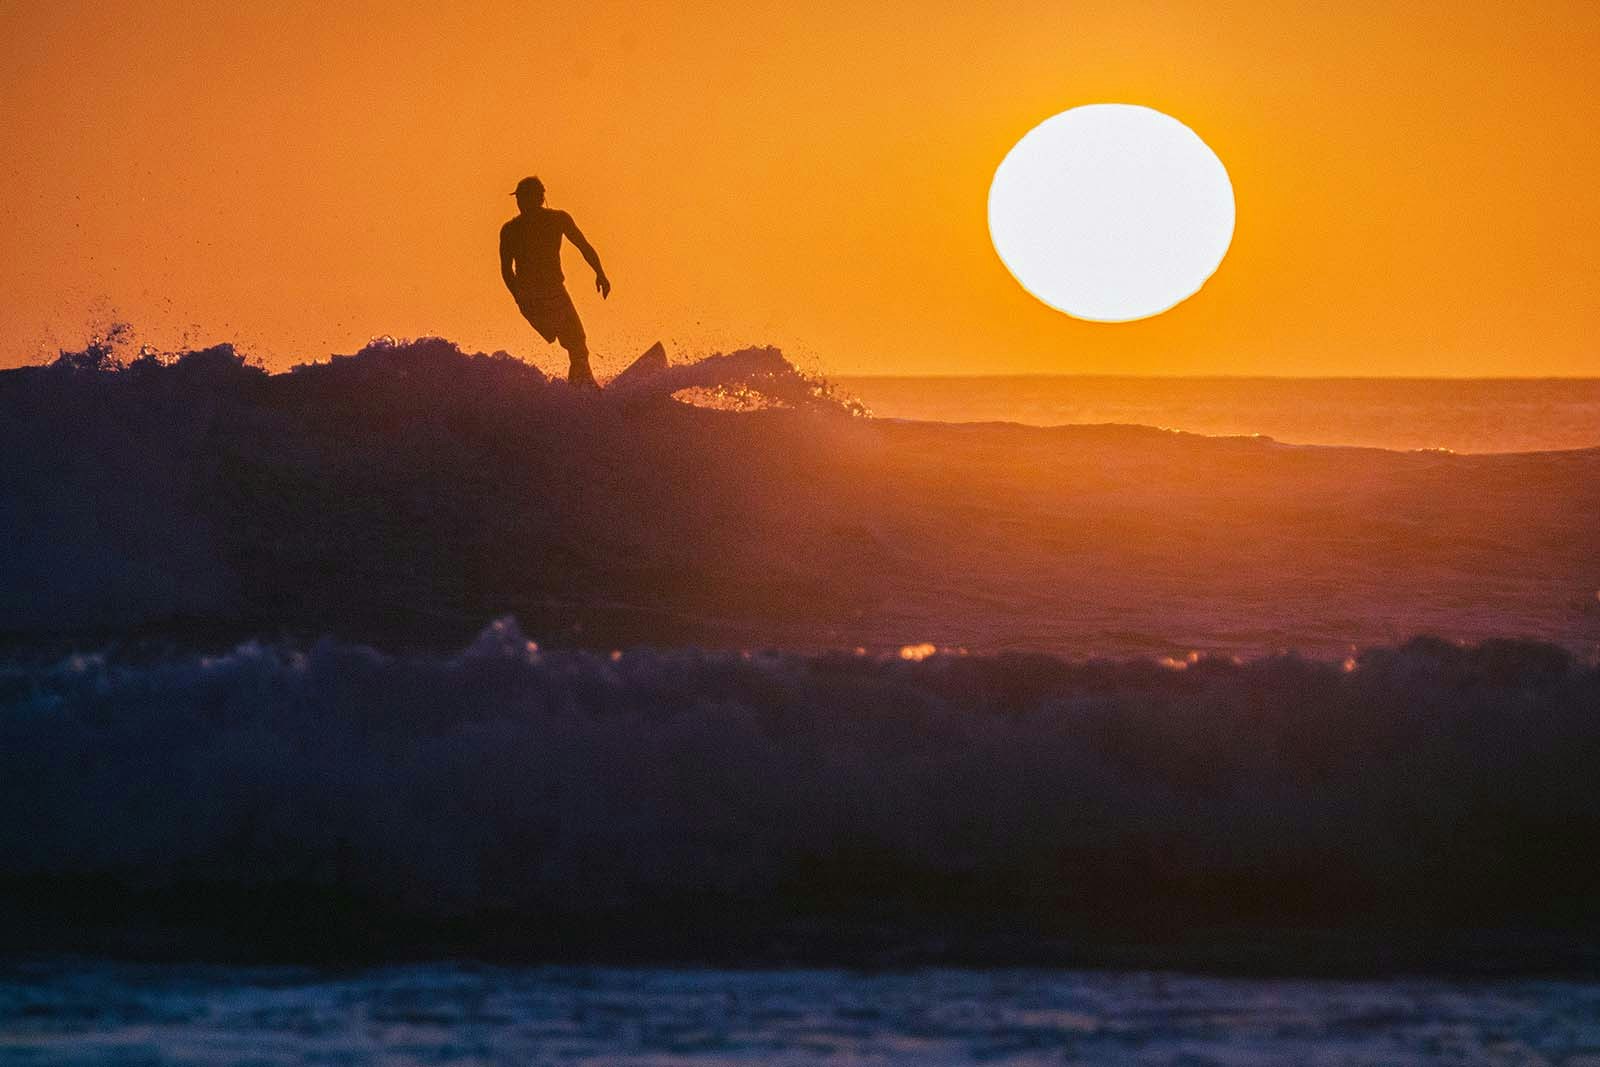 A surfer stands on his board at the crest of a wave; they are backlit by a setting orange sun. East Nusa Tenggara, Indonesia.